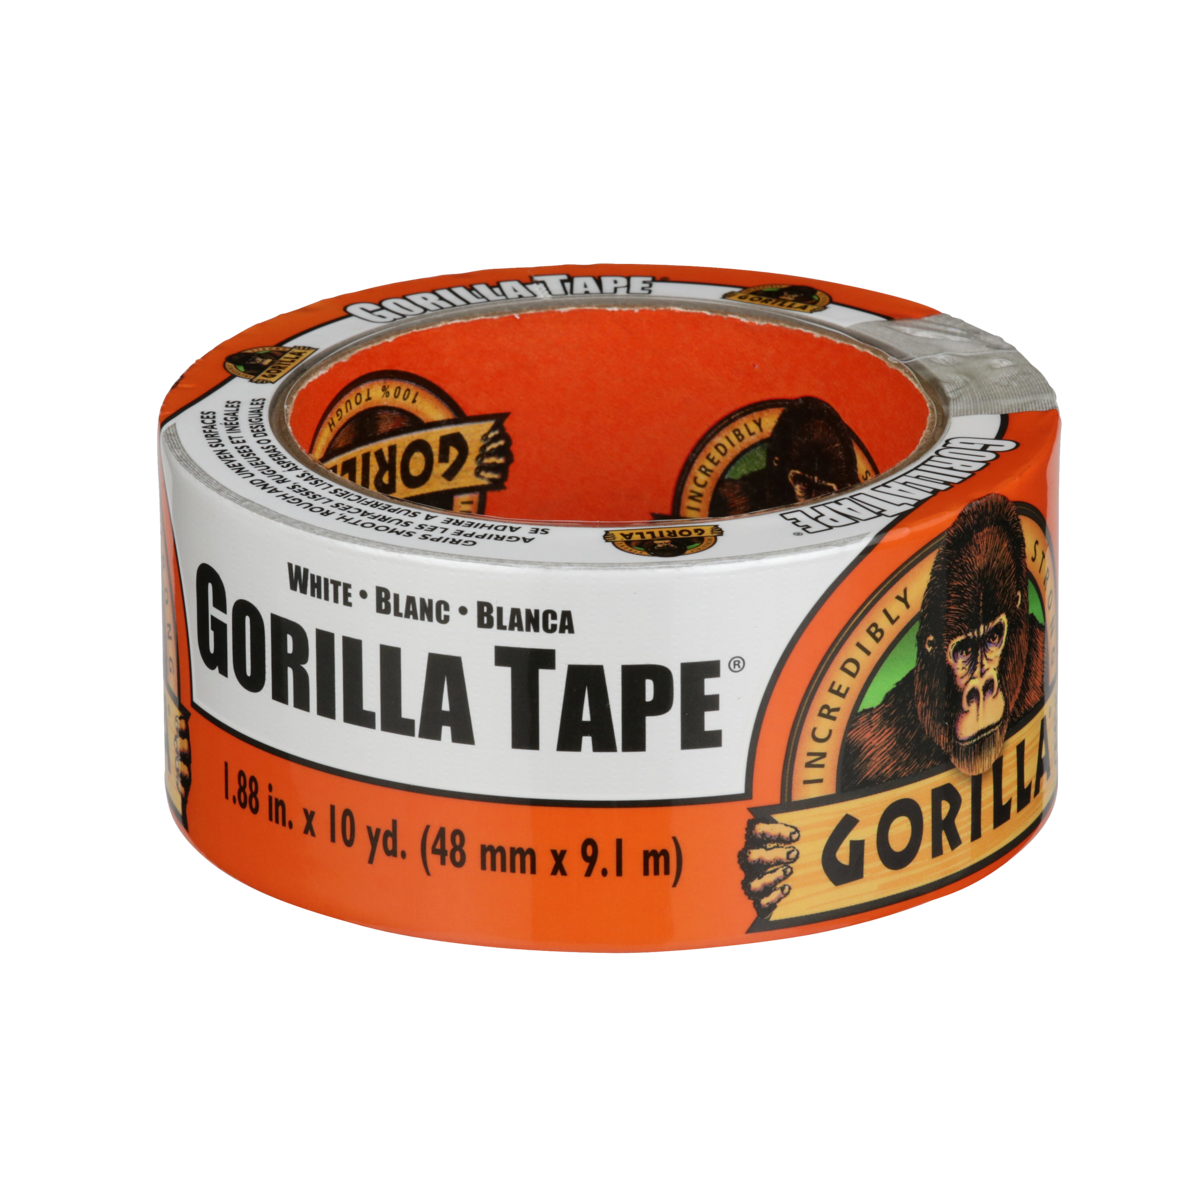 Gorilla Tape, White Duct Tape, 1.88 in. x 10 yd, White, Pack of 2 